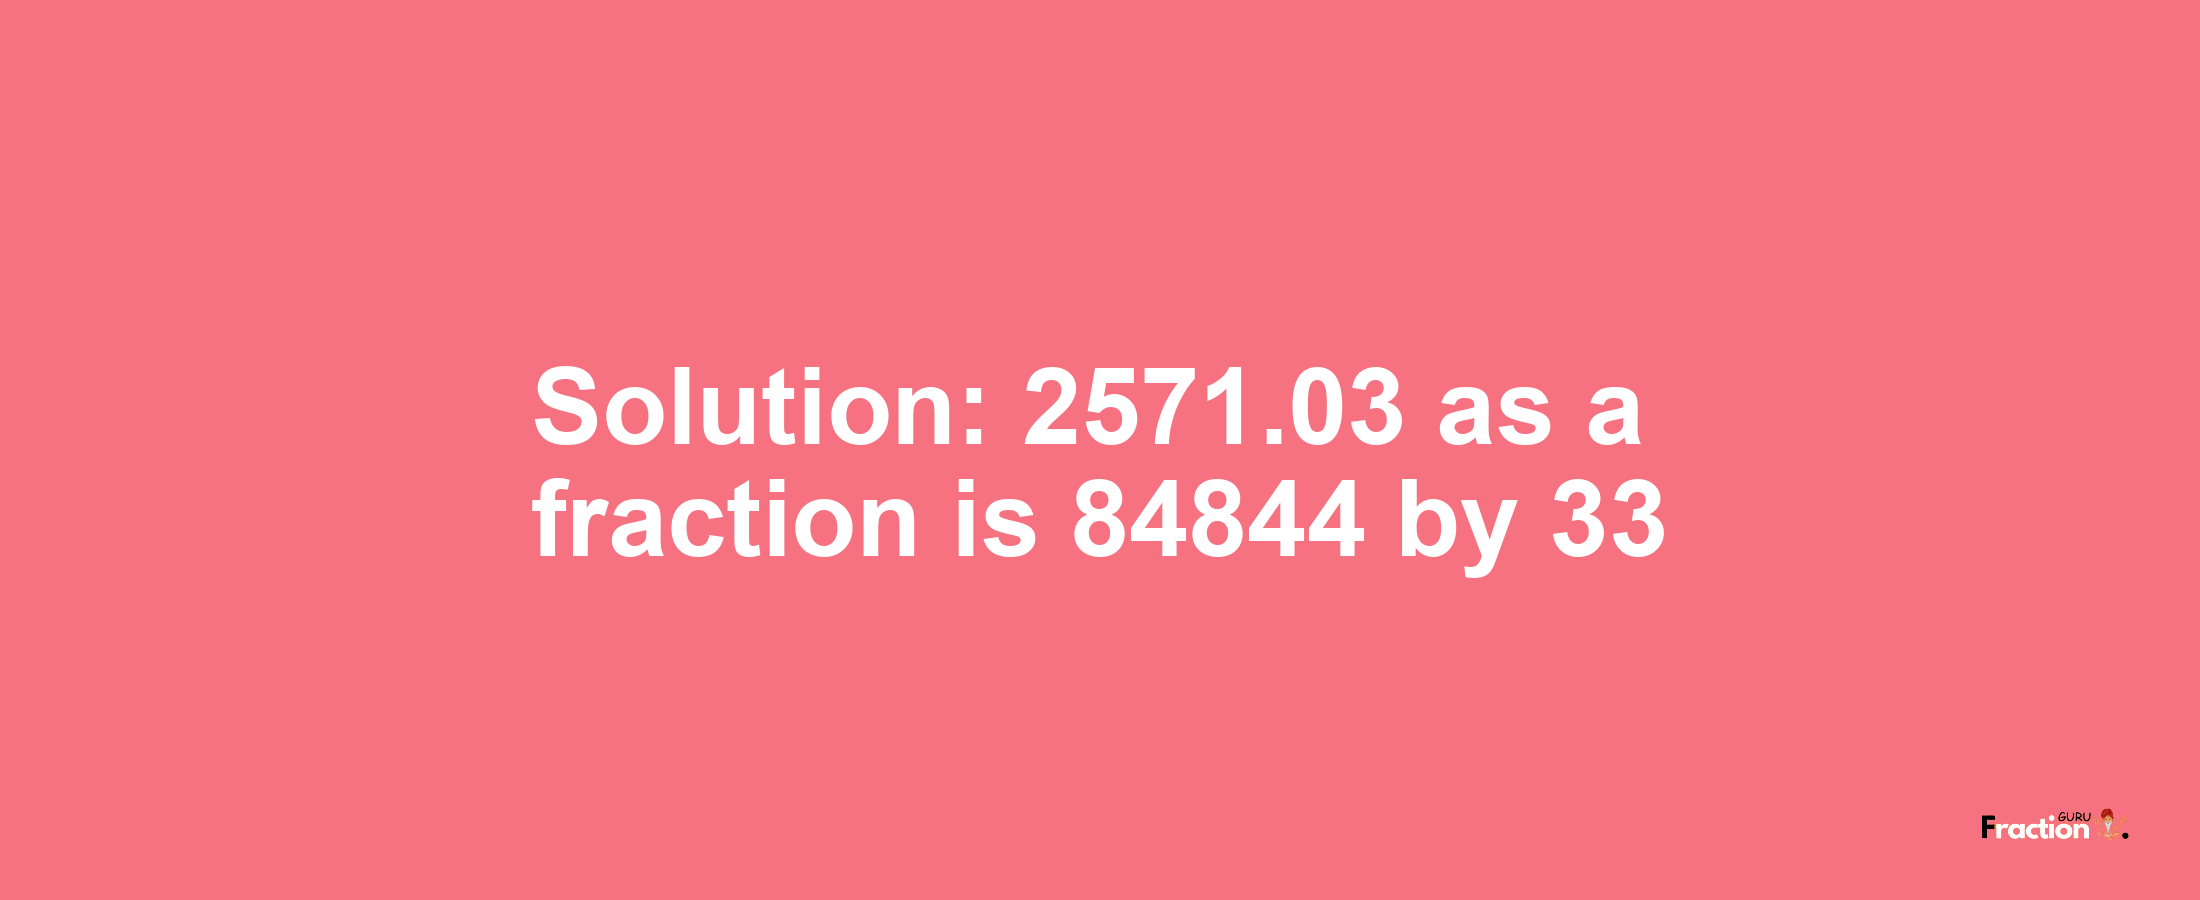 Solution:2571.03 as a fraction is 84844/33